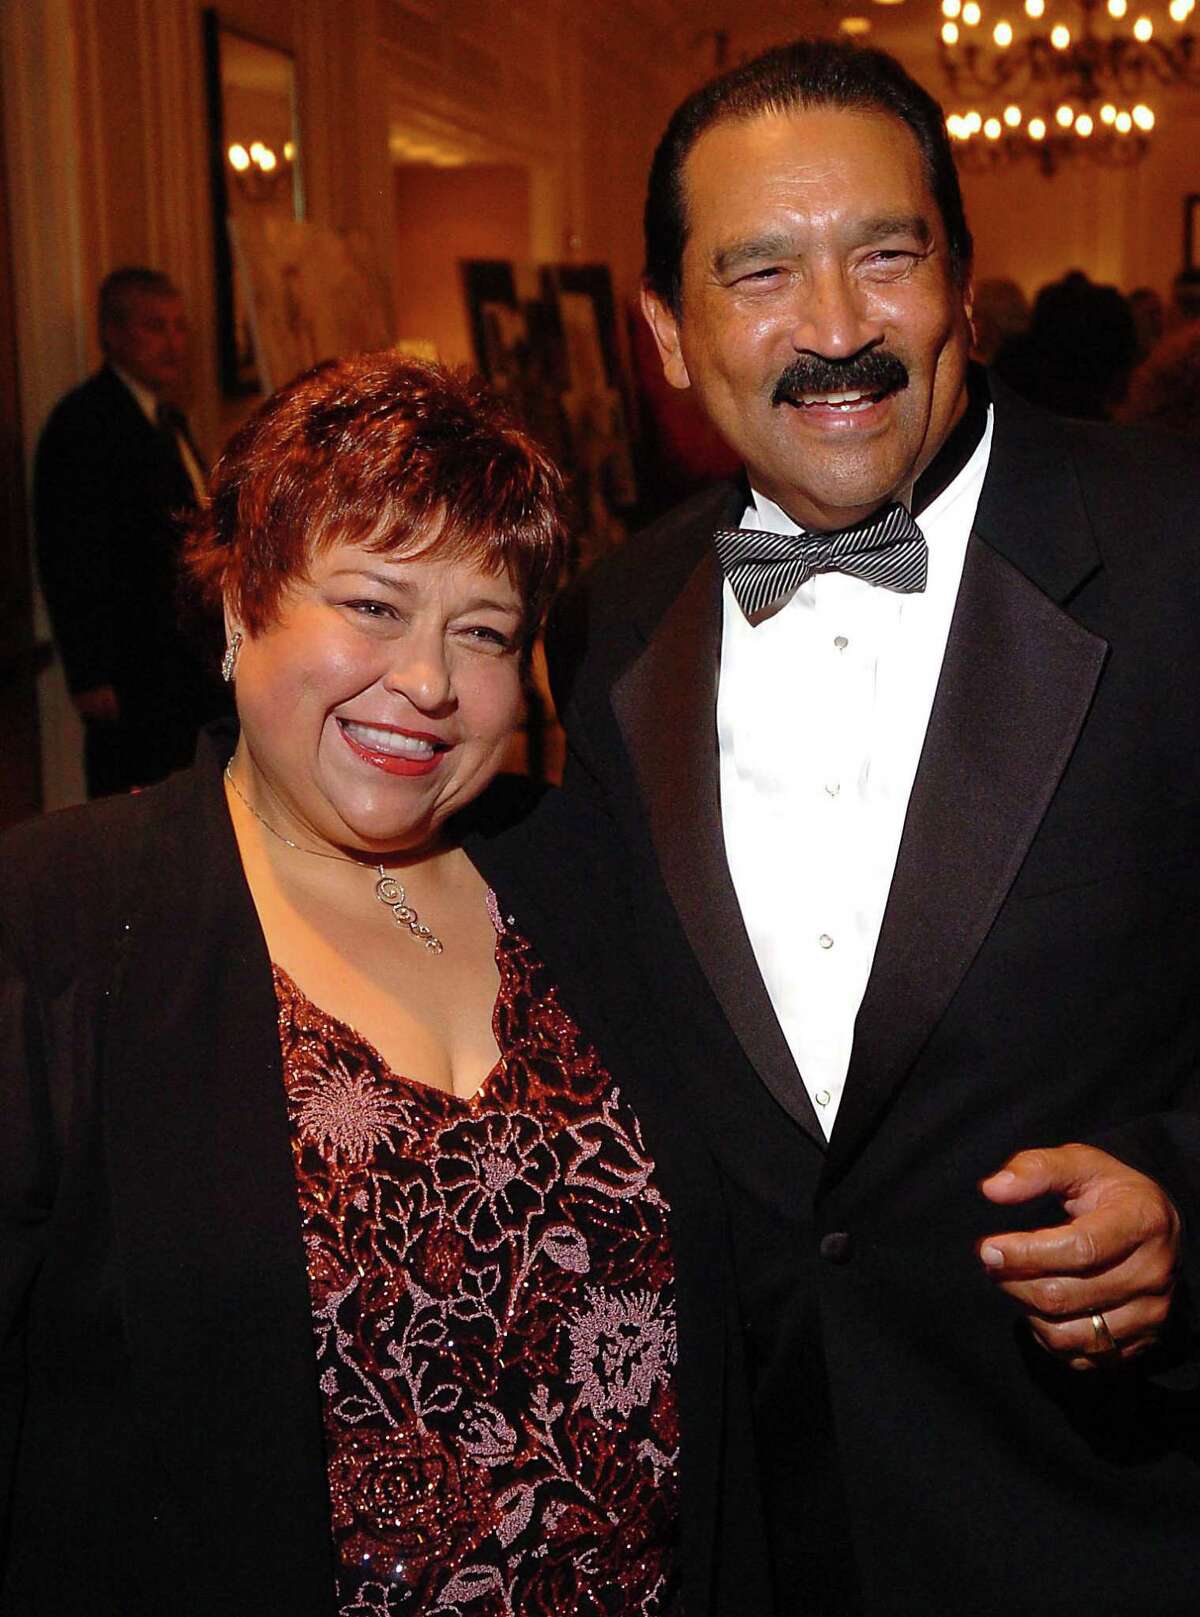 Honoree Trinidad Mendenhall and Michael Trevino at the Mexican Institute of Greater Houston Gala Saturday Sept. 17,2005.(Dave Rossman/For the Chronicle). HOUCHRON CAPTION (09/22/2005) SECSTAR COLOR: Trini Mendenhall Sosa and Michael Trevino.